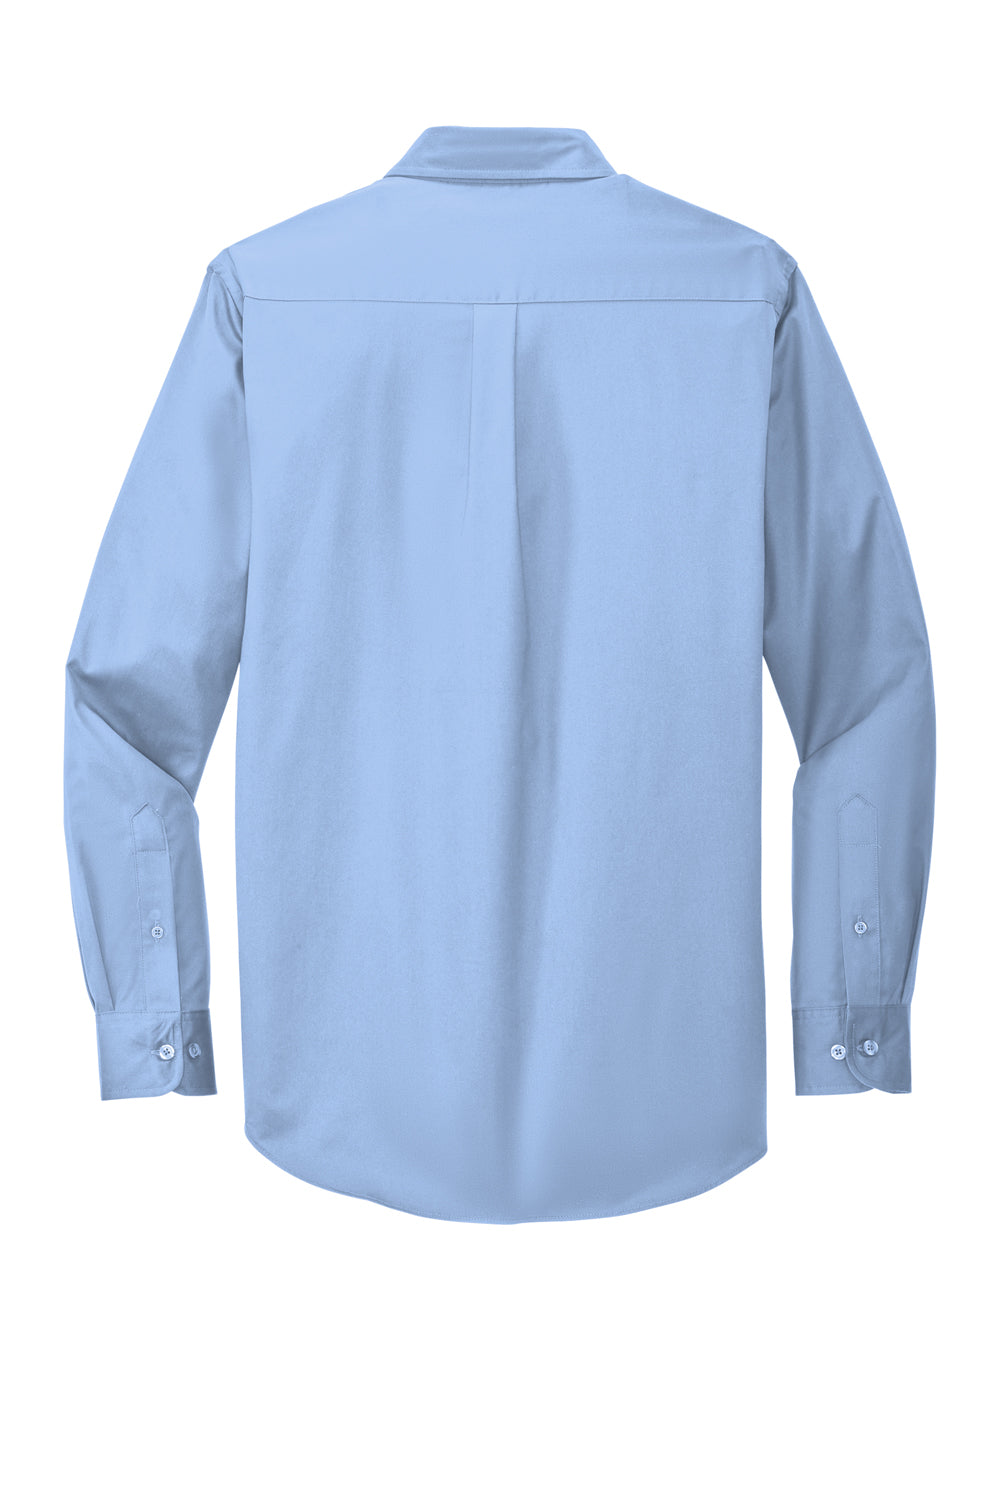 Port Authority Mens Easy Care Wrinkle Resistant Long Sleeve Button Down  Shirt w/ Pocket - Light Blue